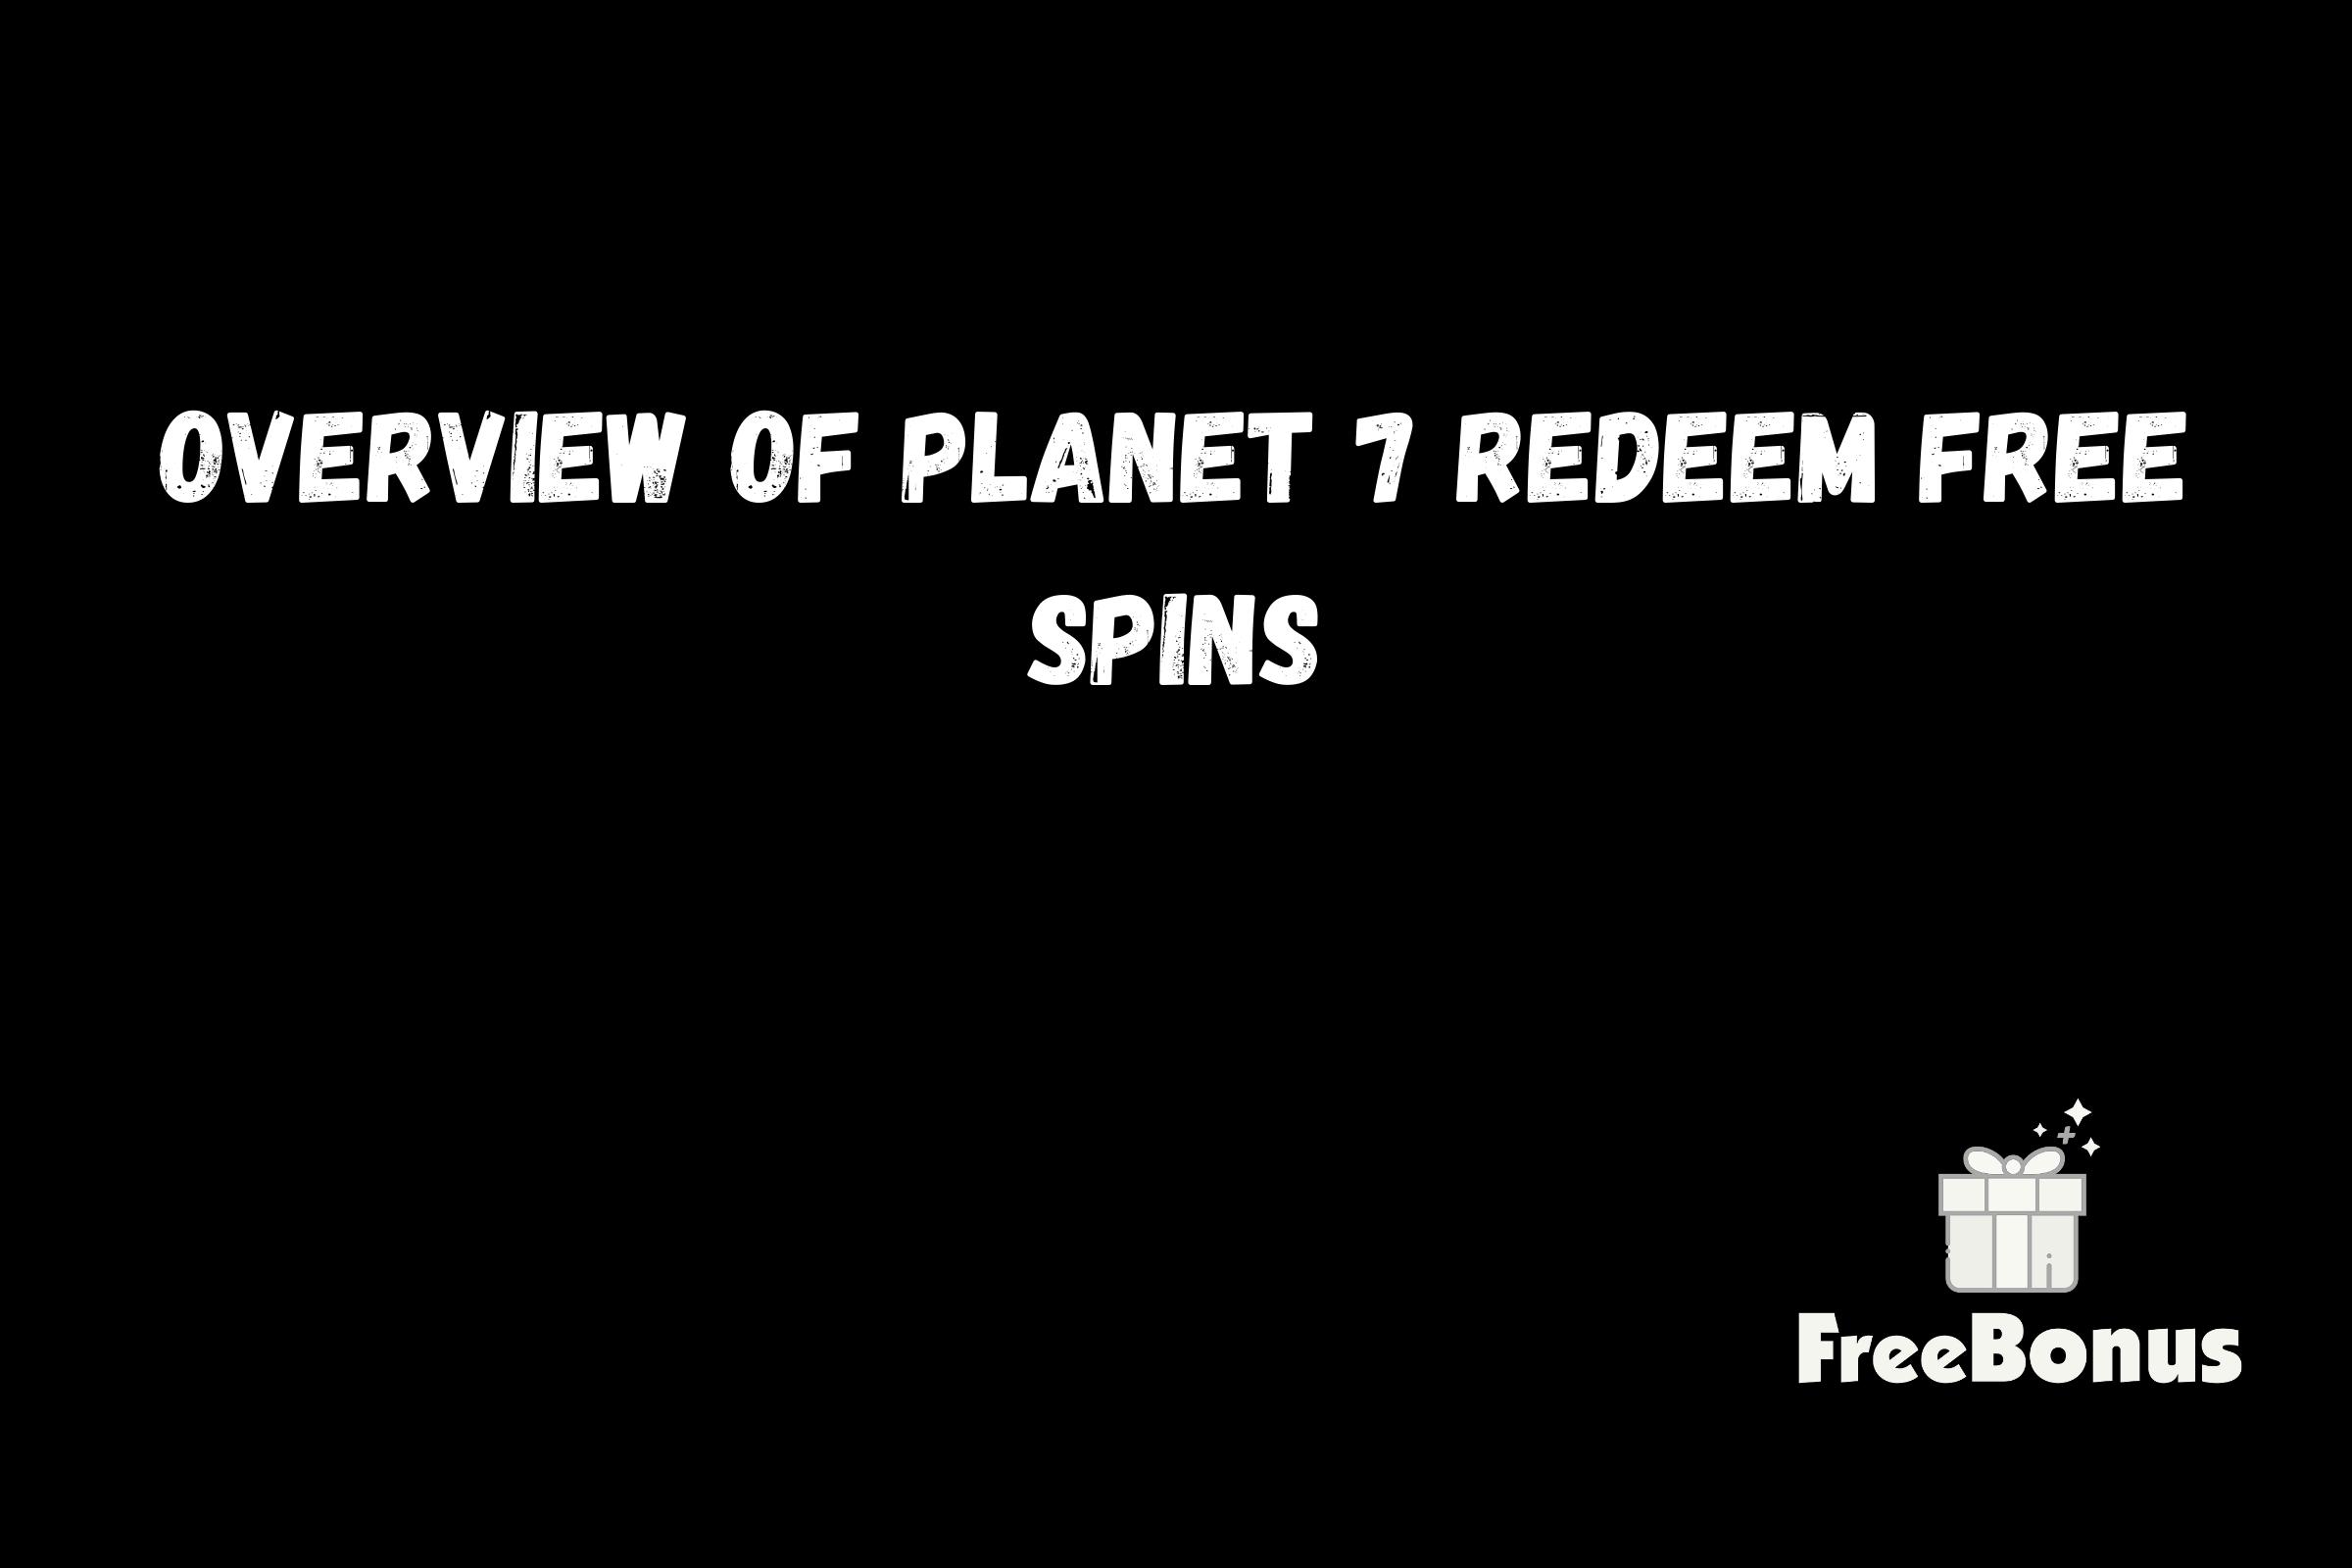 Overview Of Planet 7 Redeem Free Spins